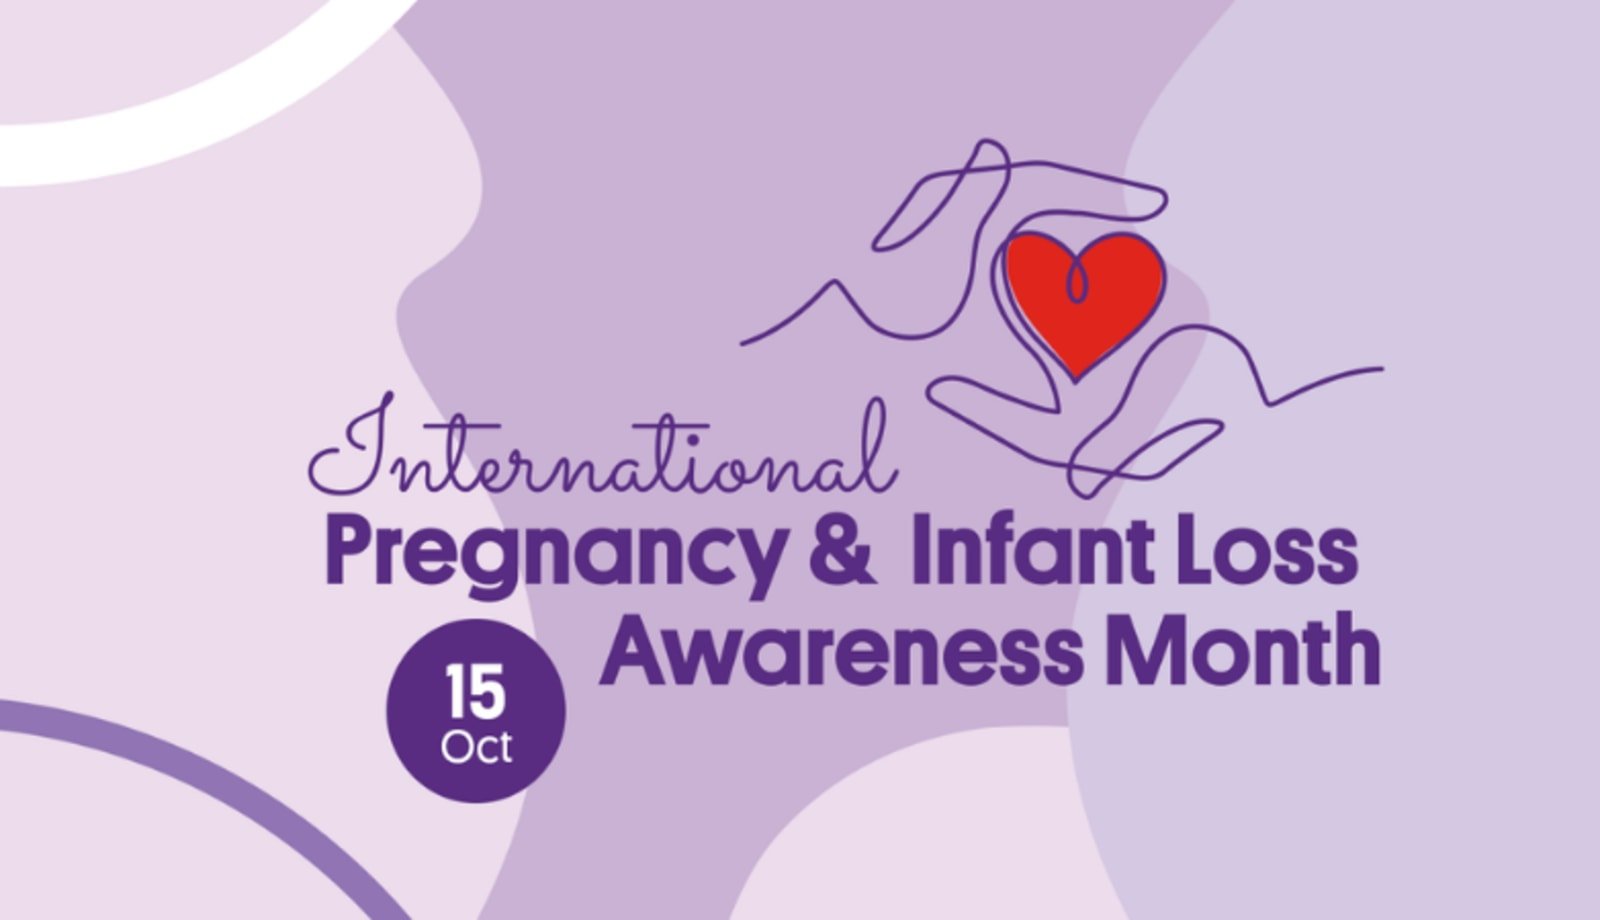 Pregnancy and Infant Loss Awareness Month 2021 | SANDS - MISCARRIAGE  STILLBIRTH NEWBORN DEATH SUPPORT